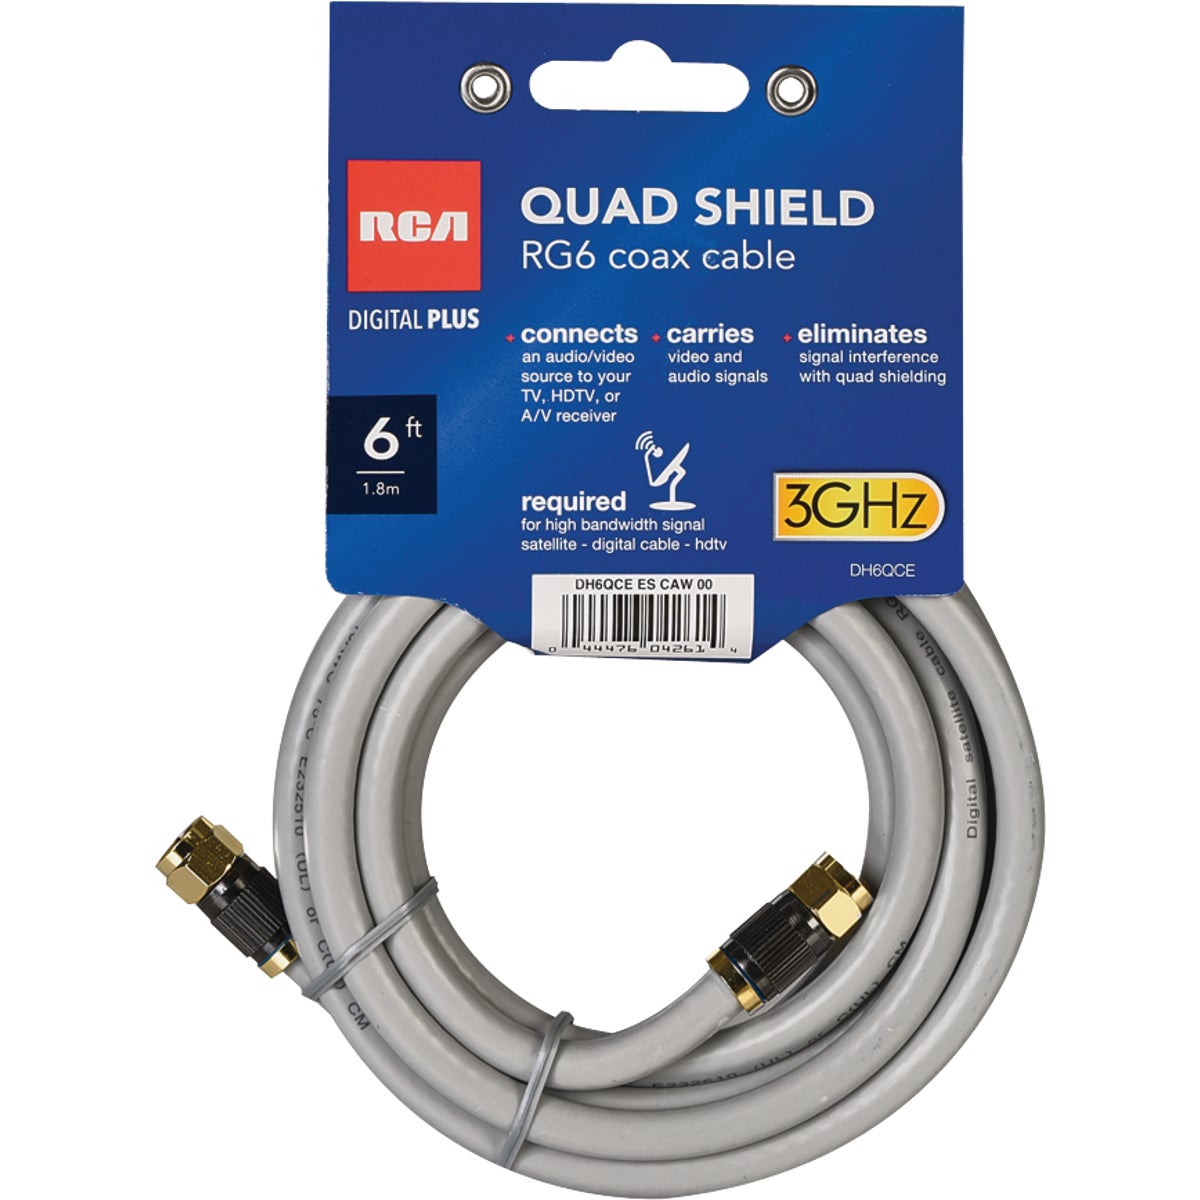 Item 561118, The Digital Plus quad RG6 coaxial cable is a quality digital cable that 